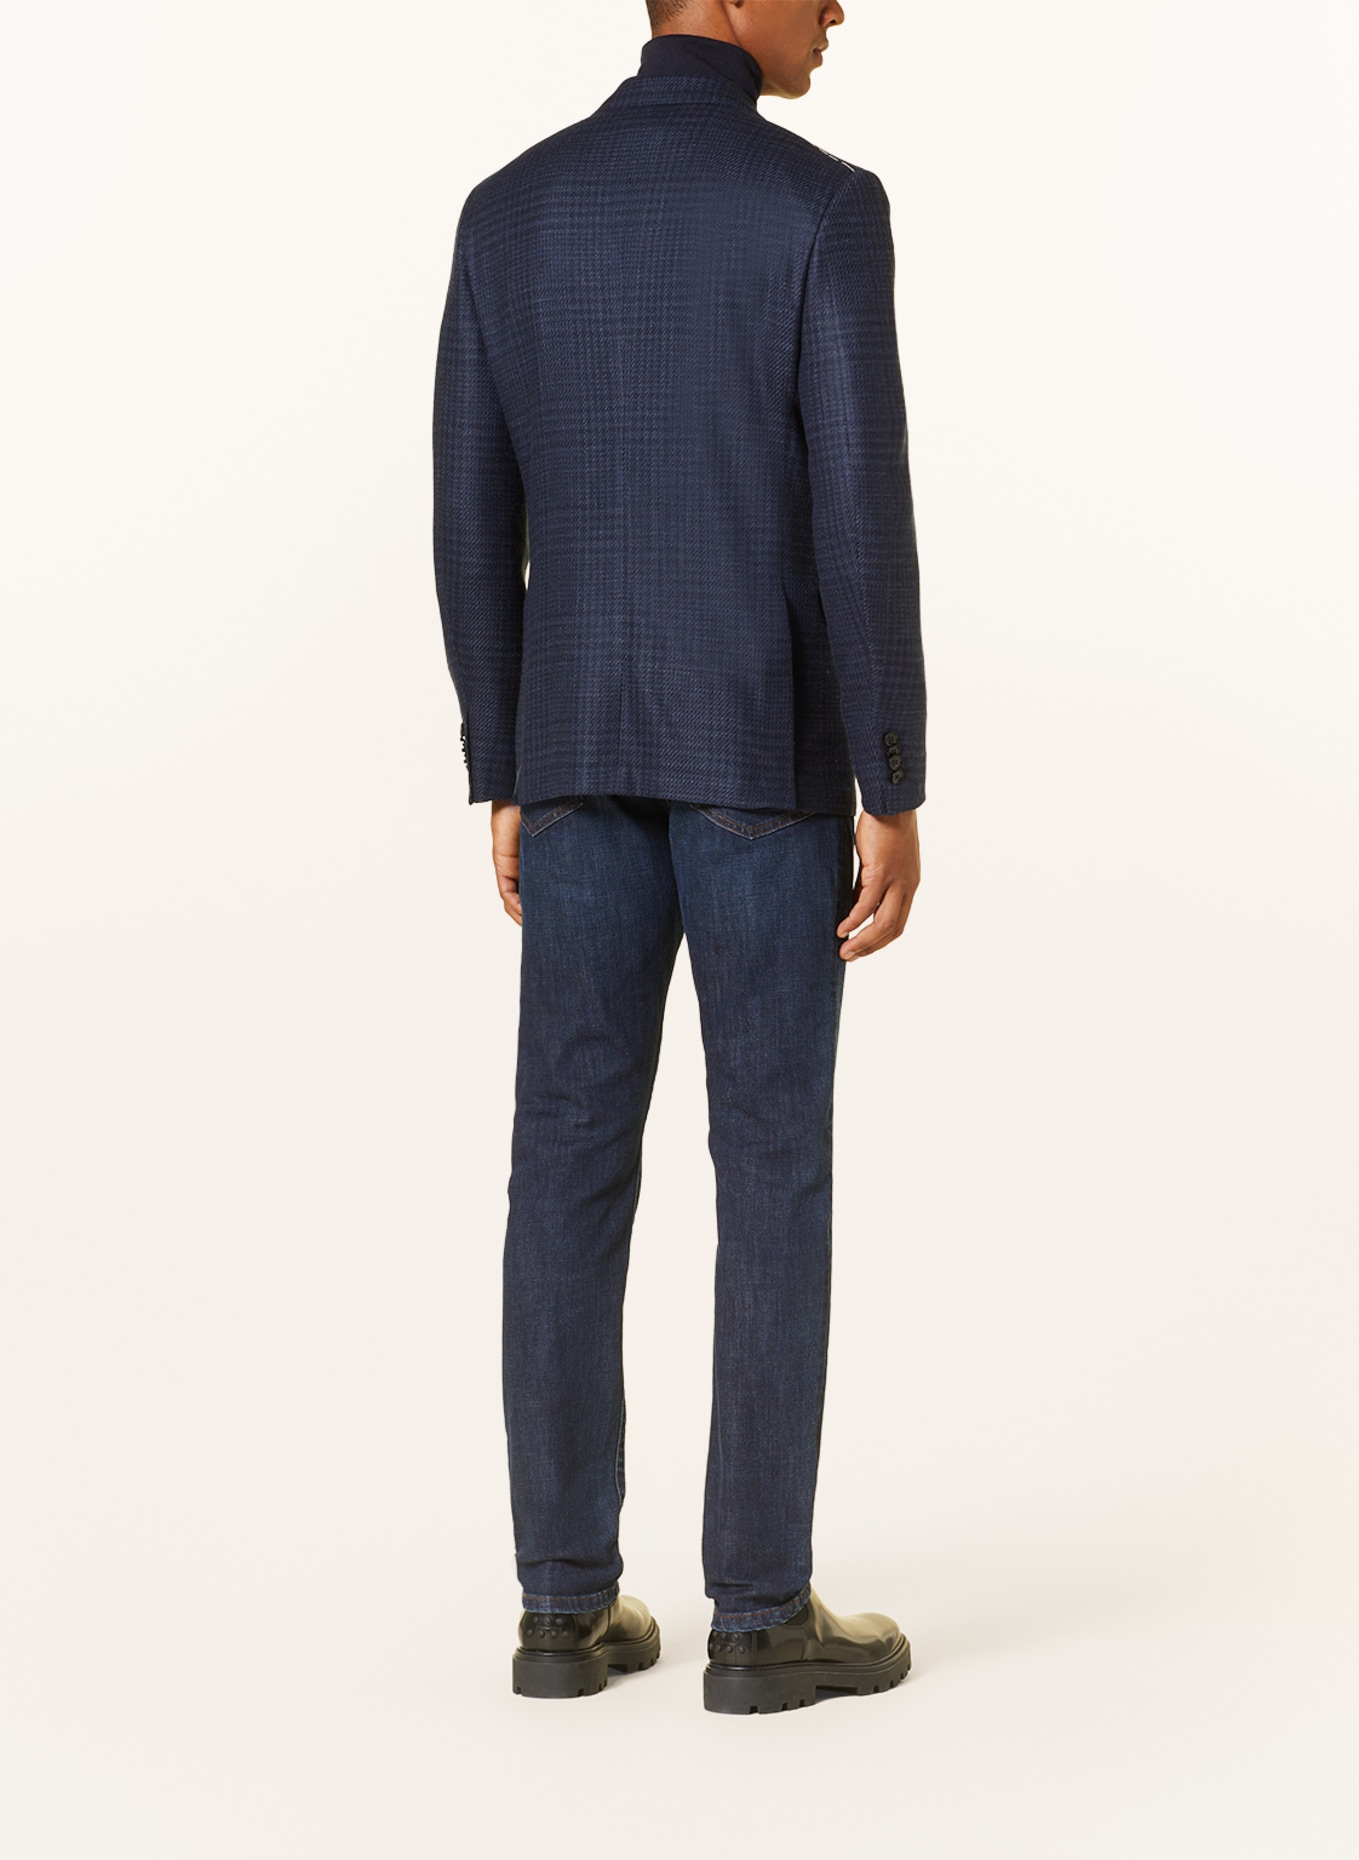 ZEGNA Tailored jacket extra slim fit, Color: NAVY (Image 3)